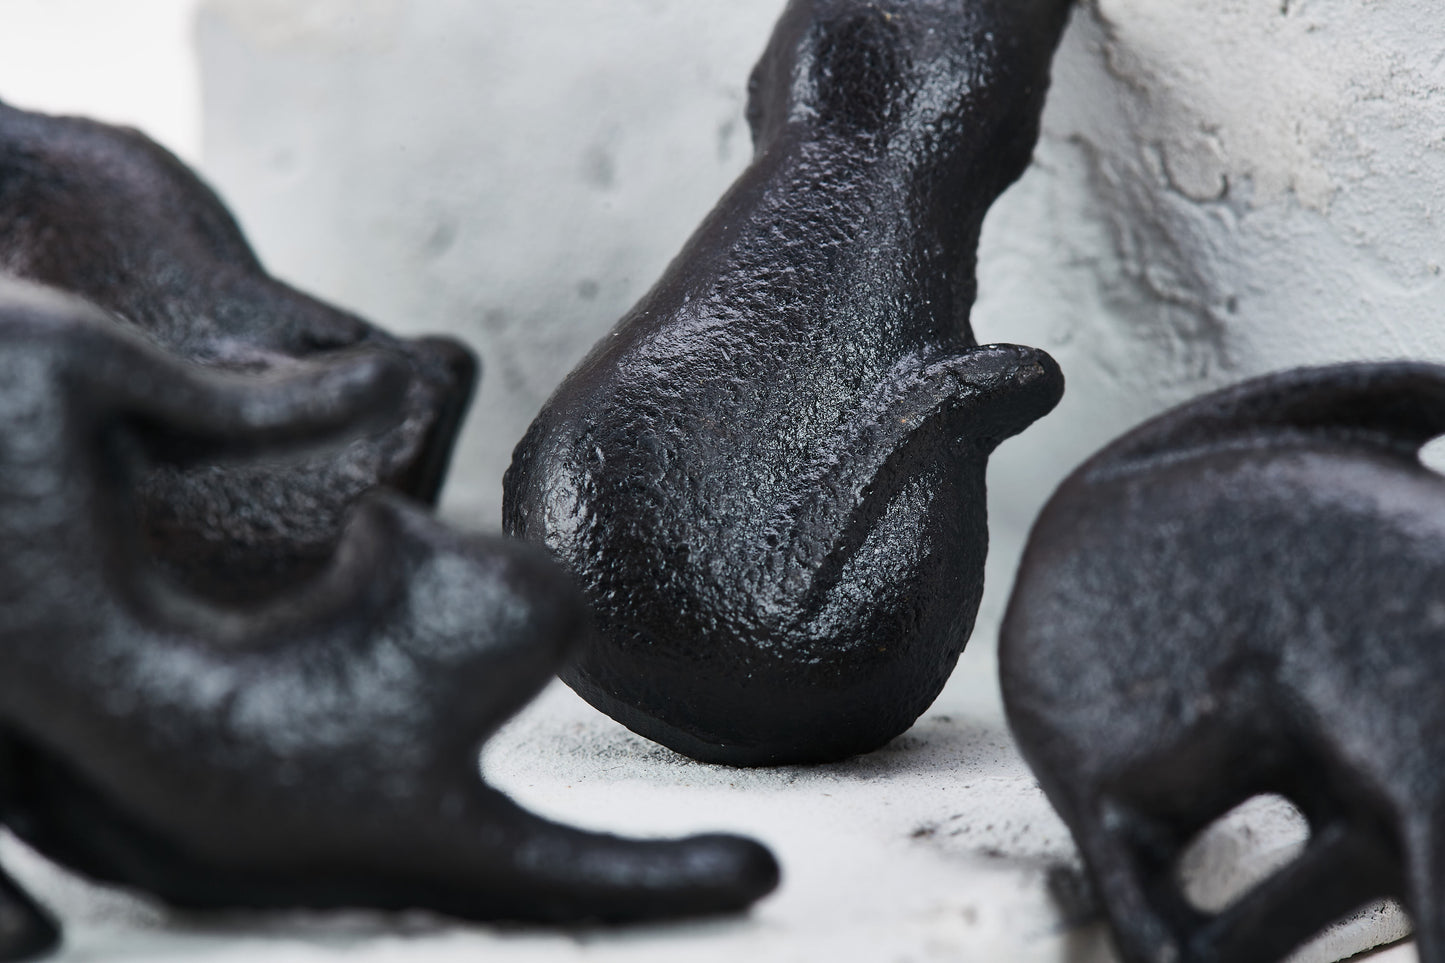 Cast Iron Kitty Drawer Pulls - Lucid and Real